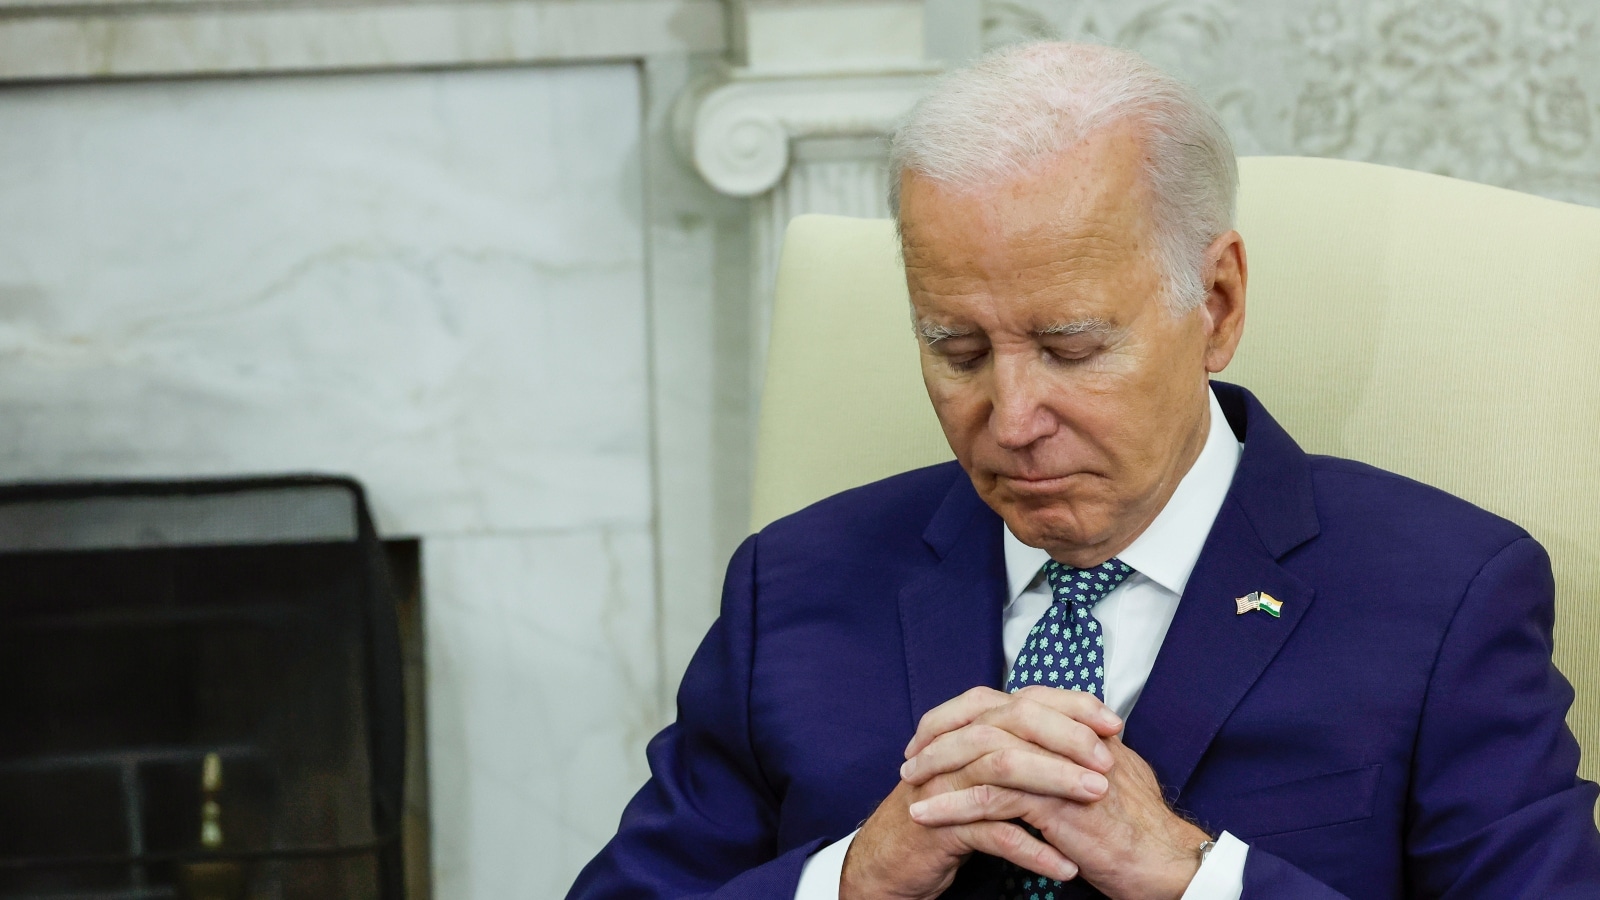 White House Changes Tune After Hunter Biden Email Drops Indicating Joe Linked to Chinese Deal